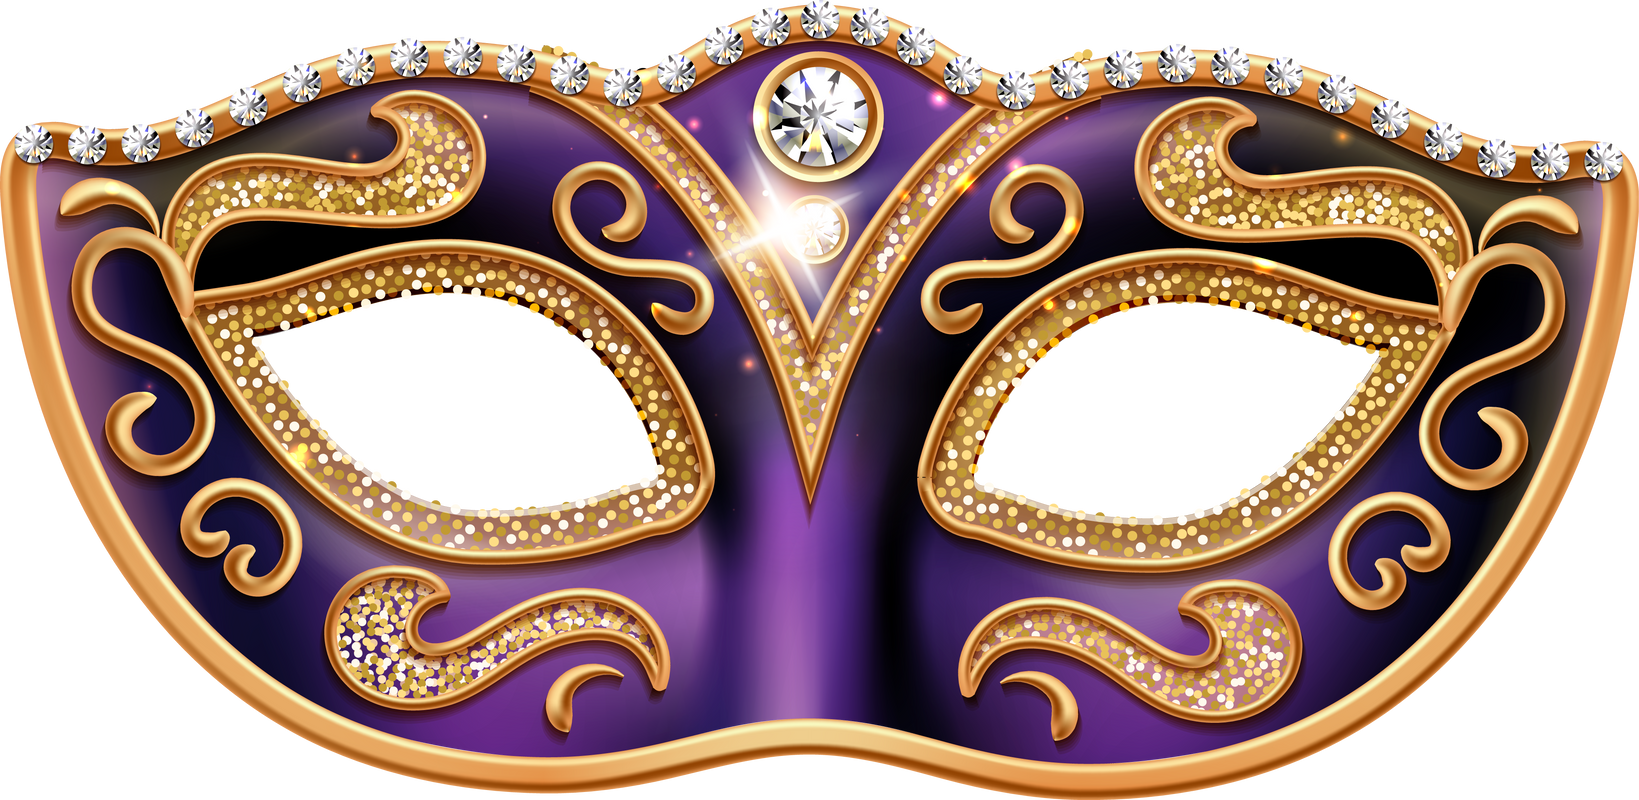 Mask with diamonds for carnival, masquerade